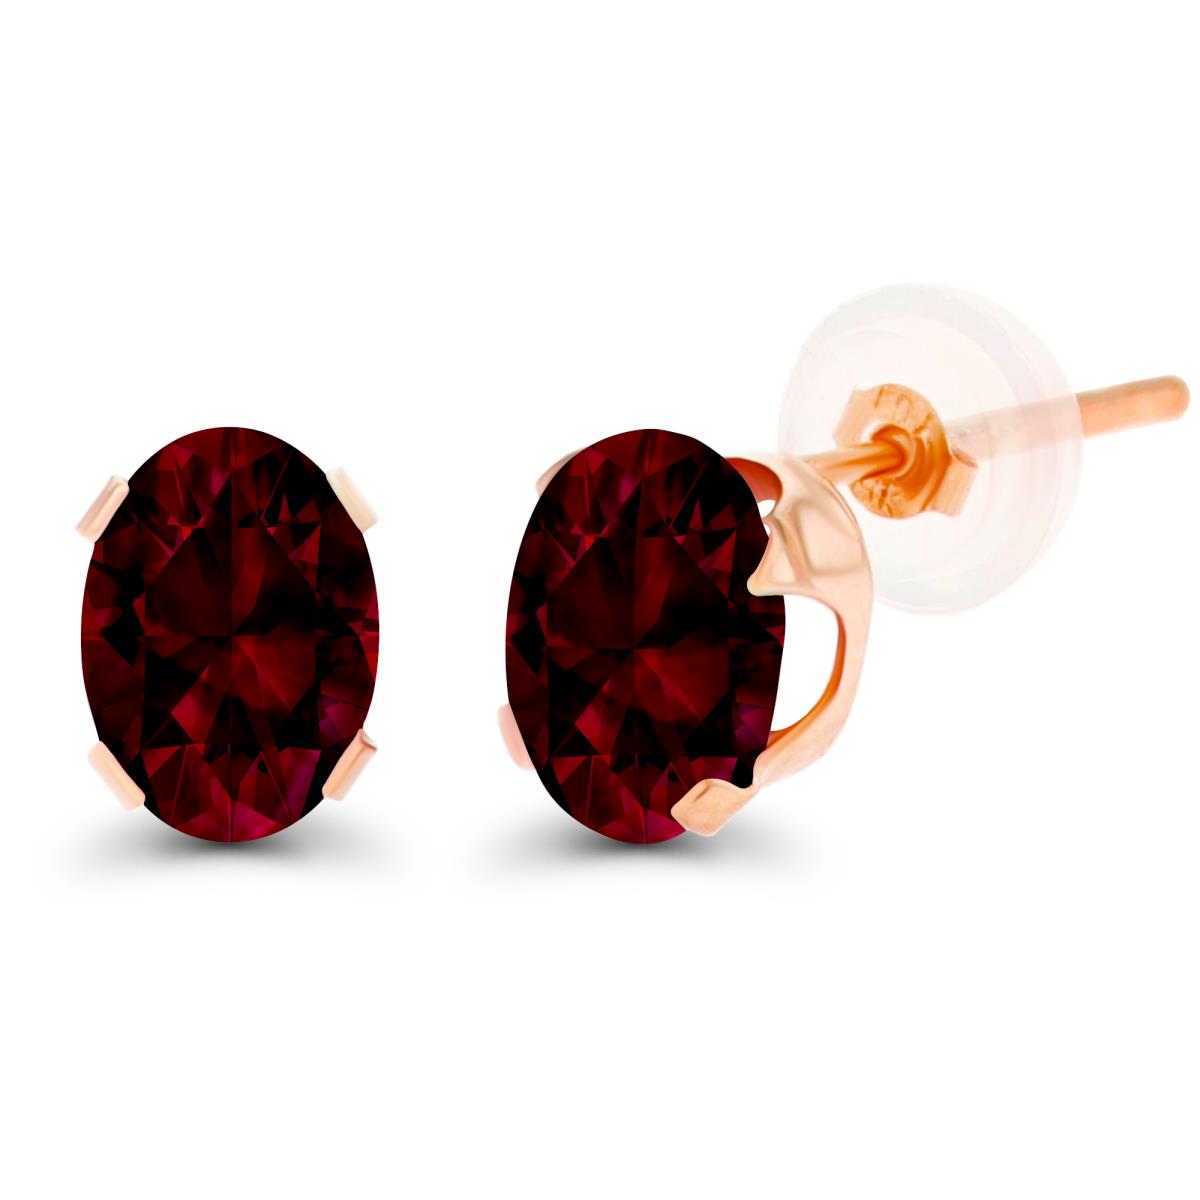 10K Rose Gold 7x5mm Oval Garnet Stud Earring with Silicone Back